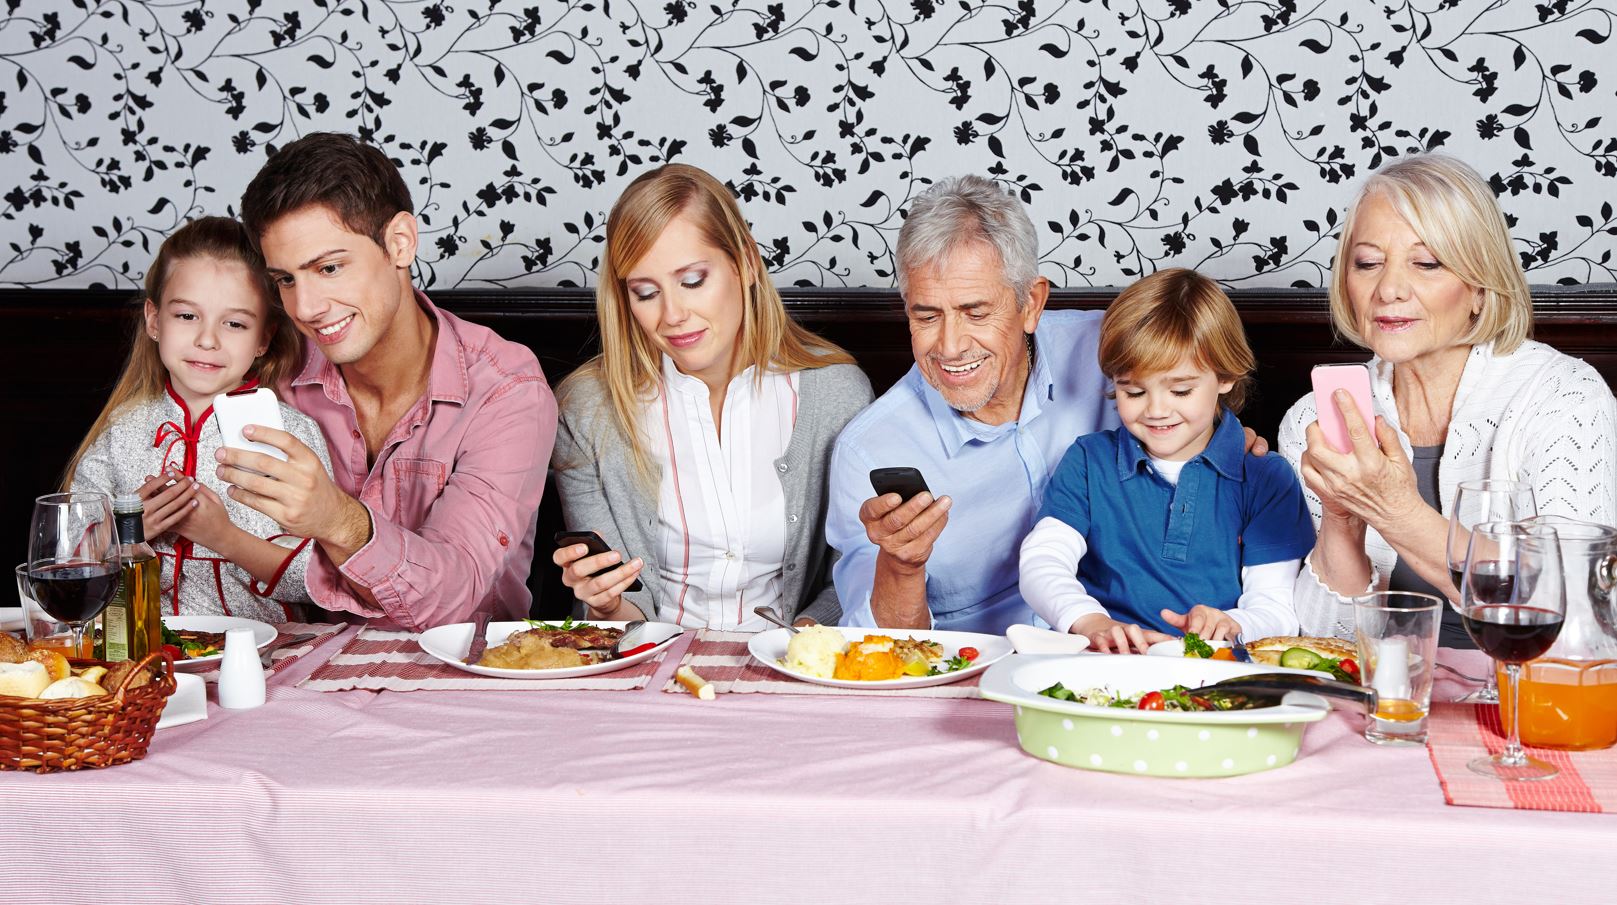 Optus Pause Family looking at Smartphone